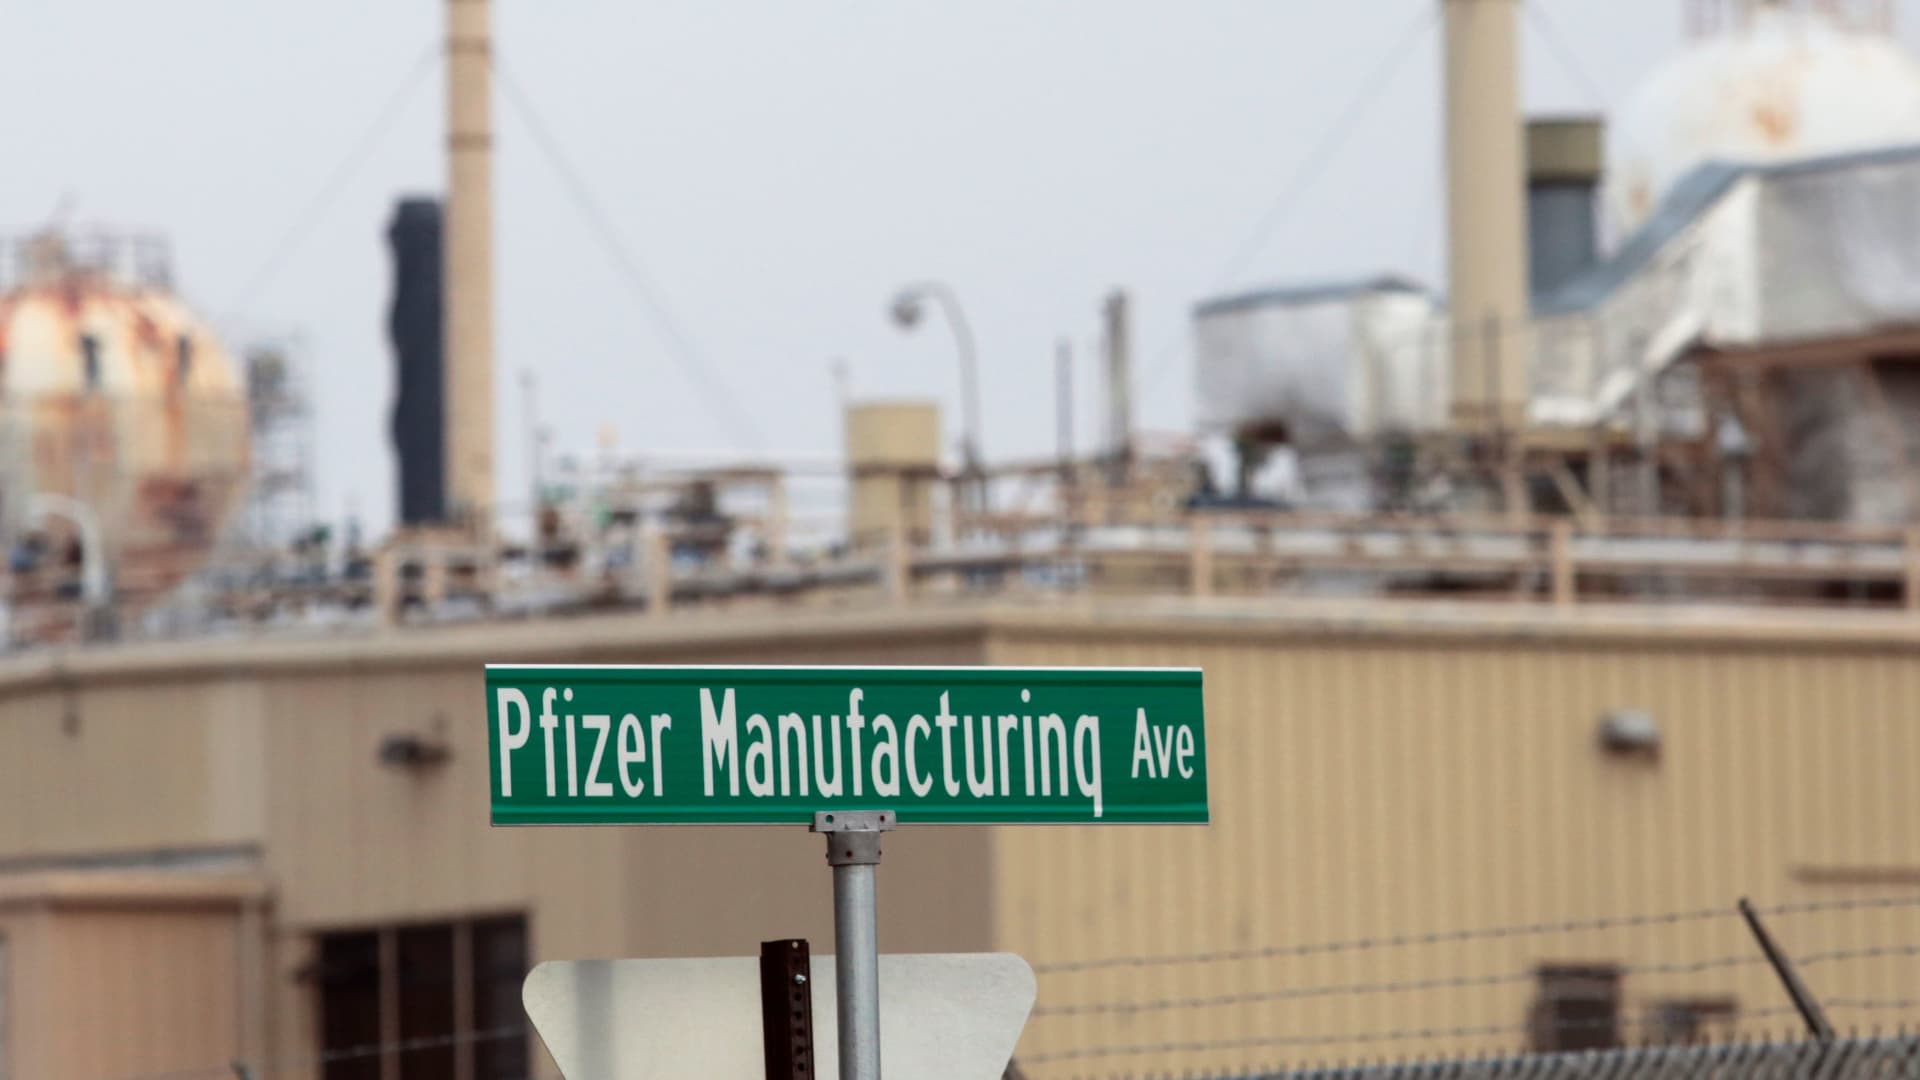 The Pfizer Global Supply manufacturing plant is seen in Portage, Michigan, U.S., December 11, 2020.